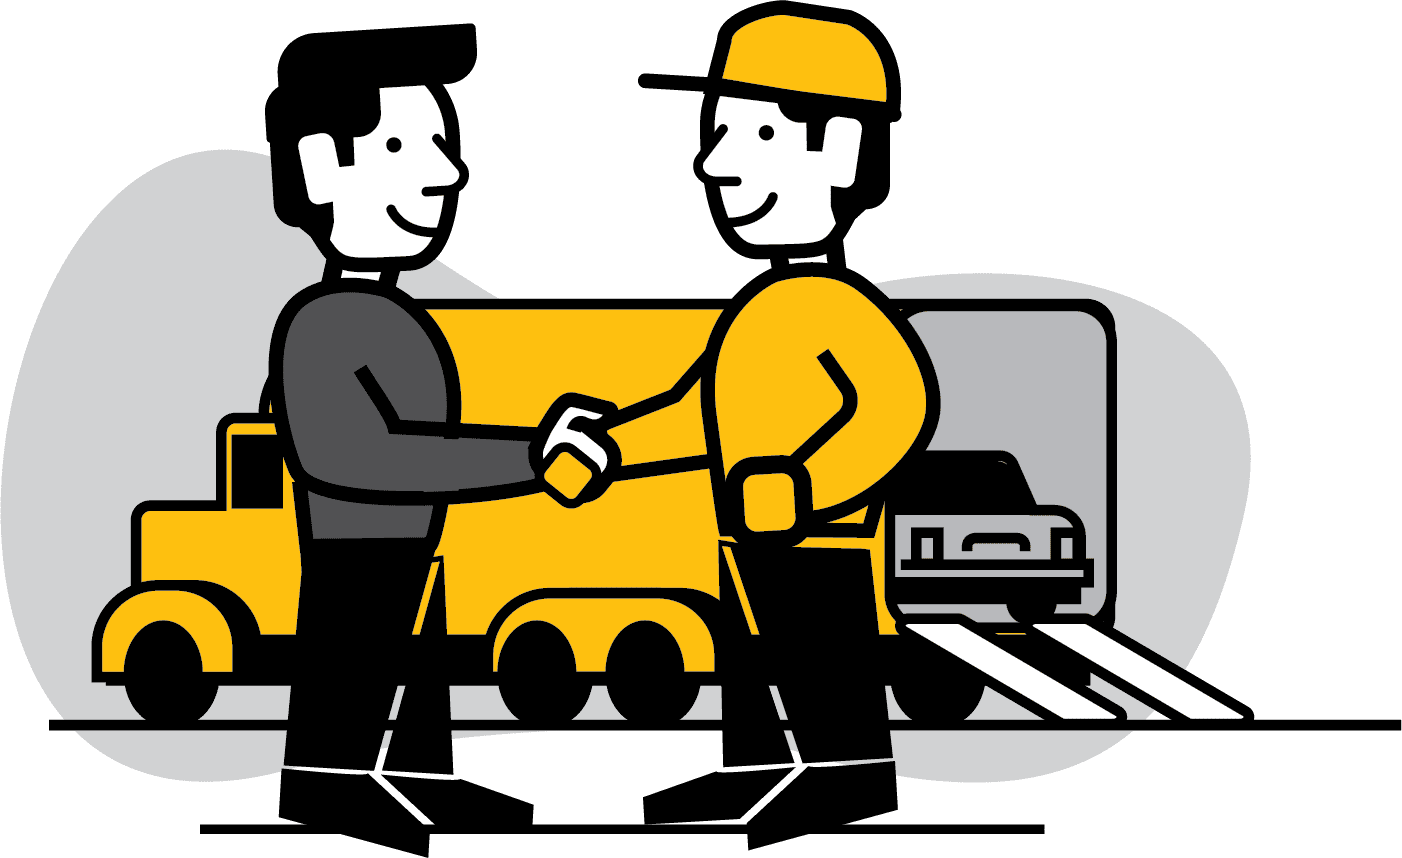 Car carrier shaking hands with customer, while car is being loaded into an enclosed trailer